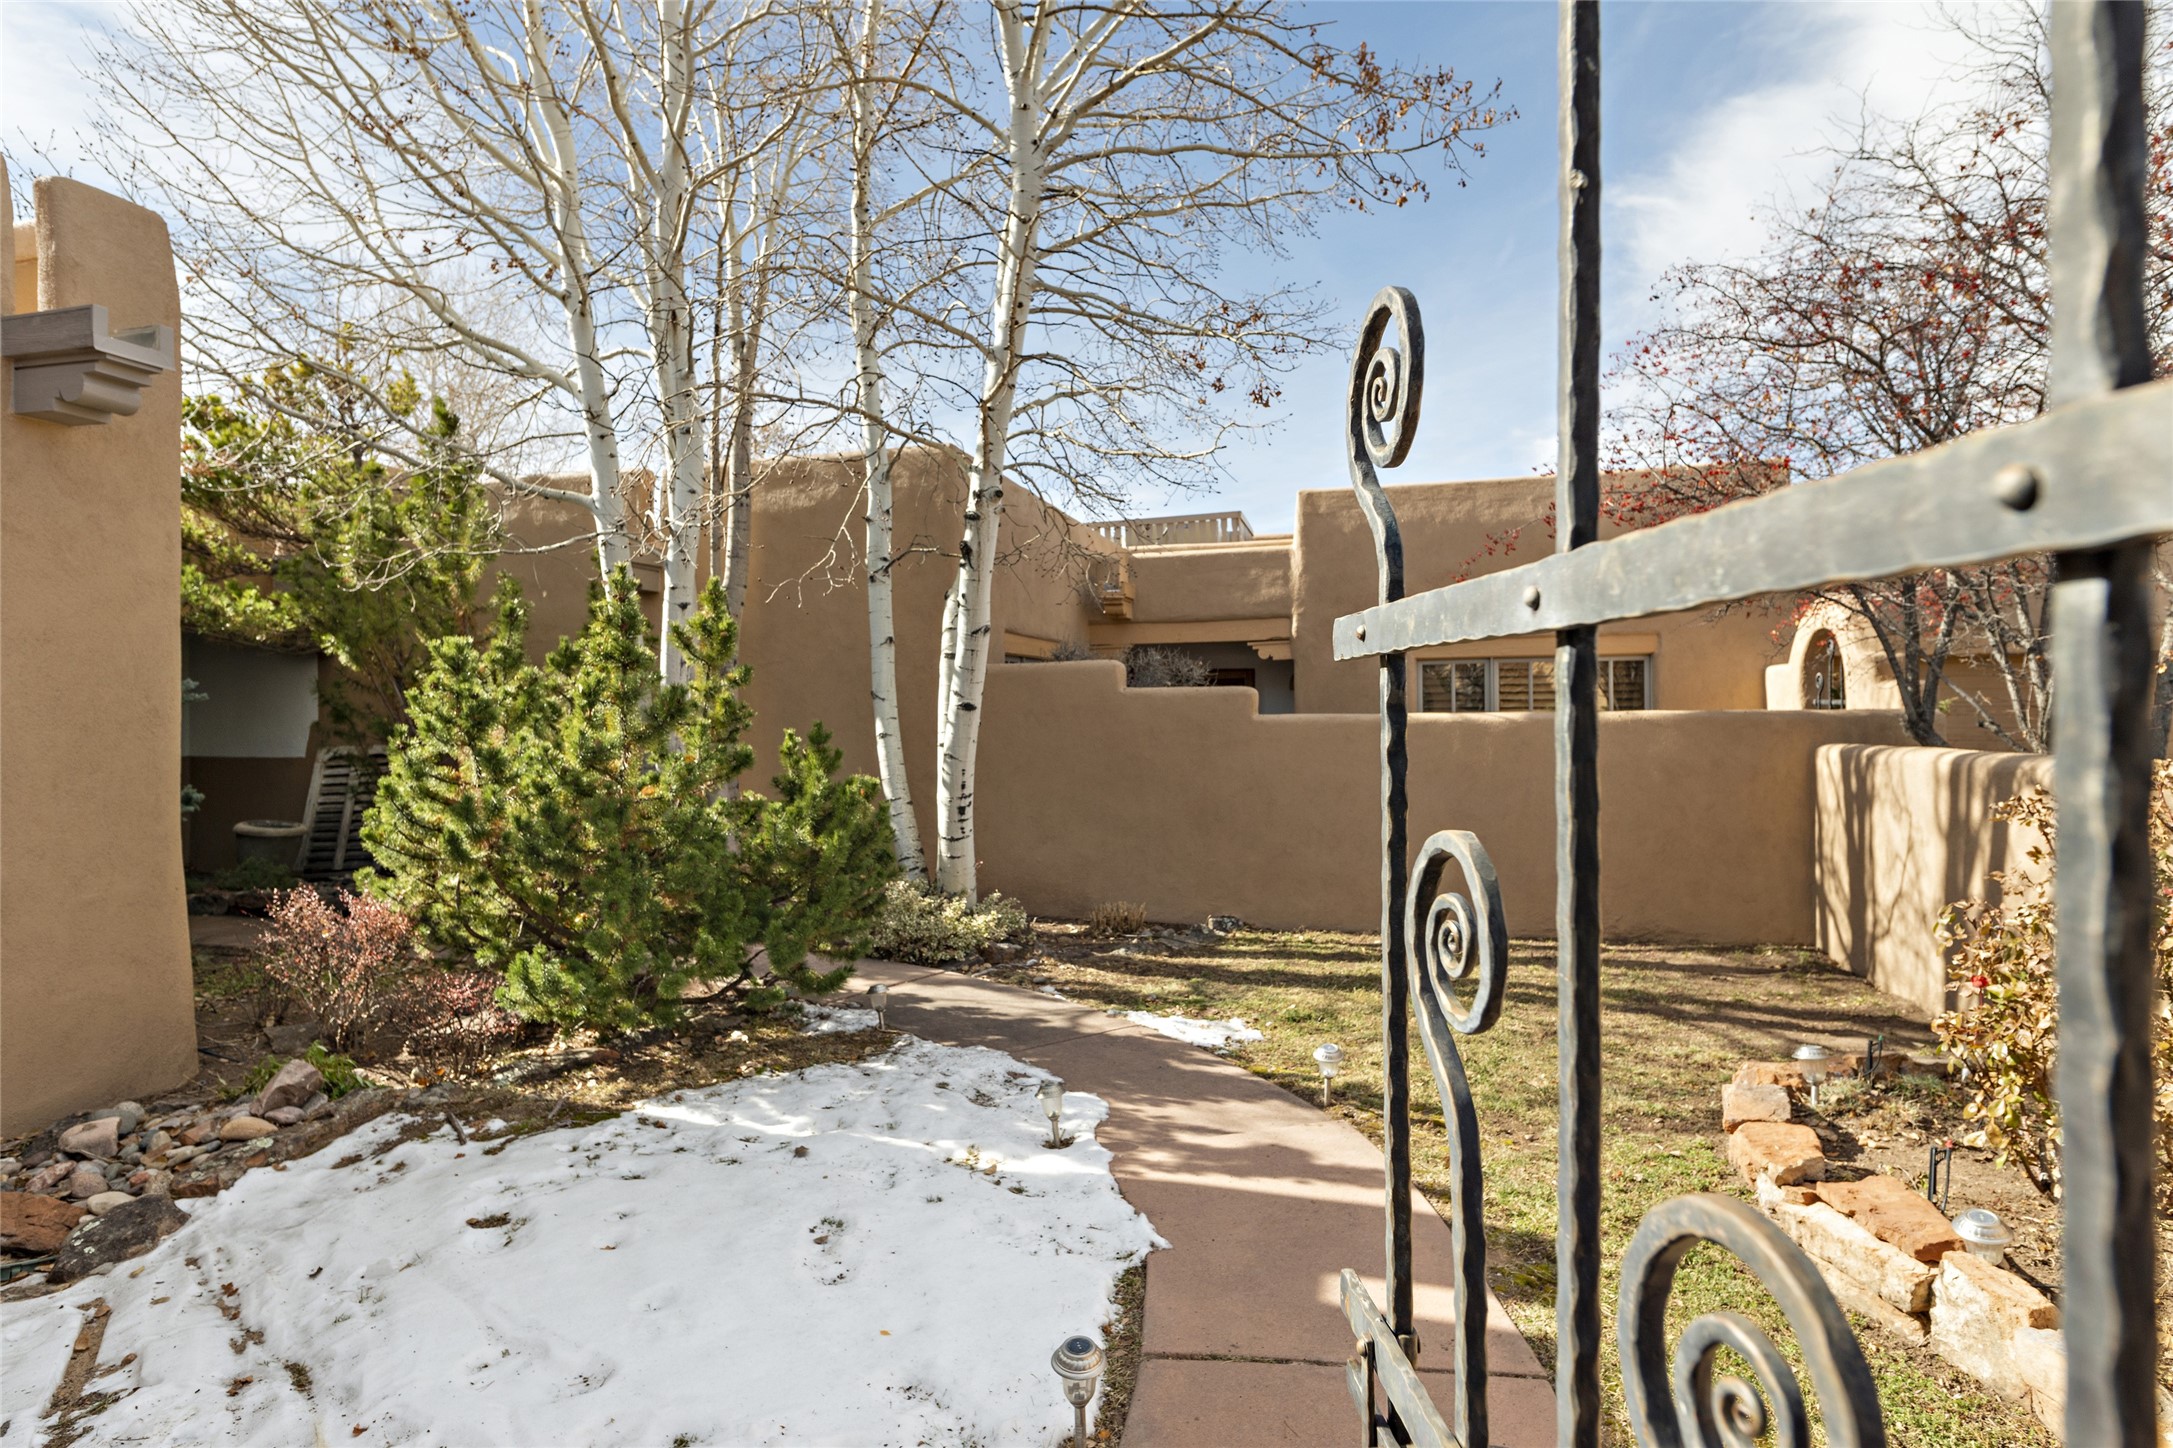 3101 Old Pecos Trail 683, Santa Fe, New Mexico 87505, 2 Bedrooms Bedrooms, ,2 BathroomsBathrooms,Residential,For Sale,3101 Old Pecos Trail 683,202233989